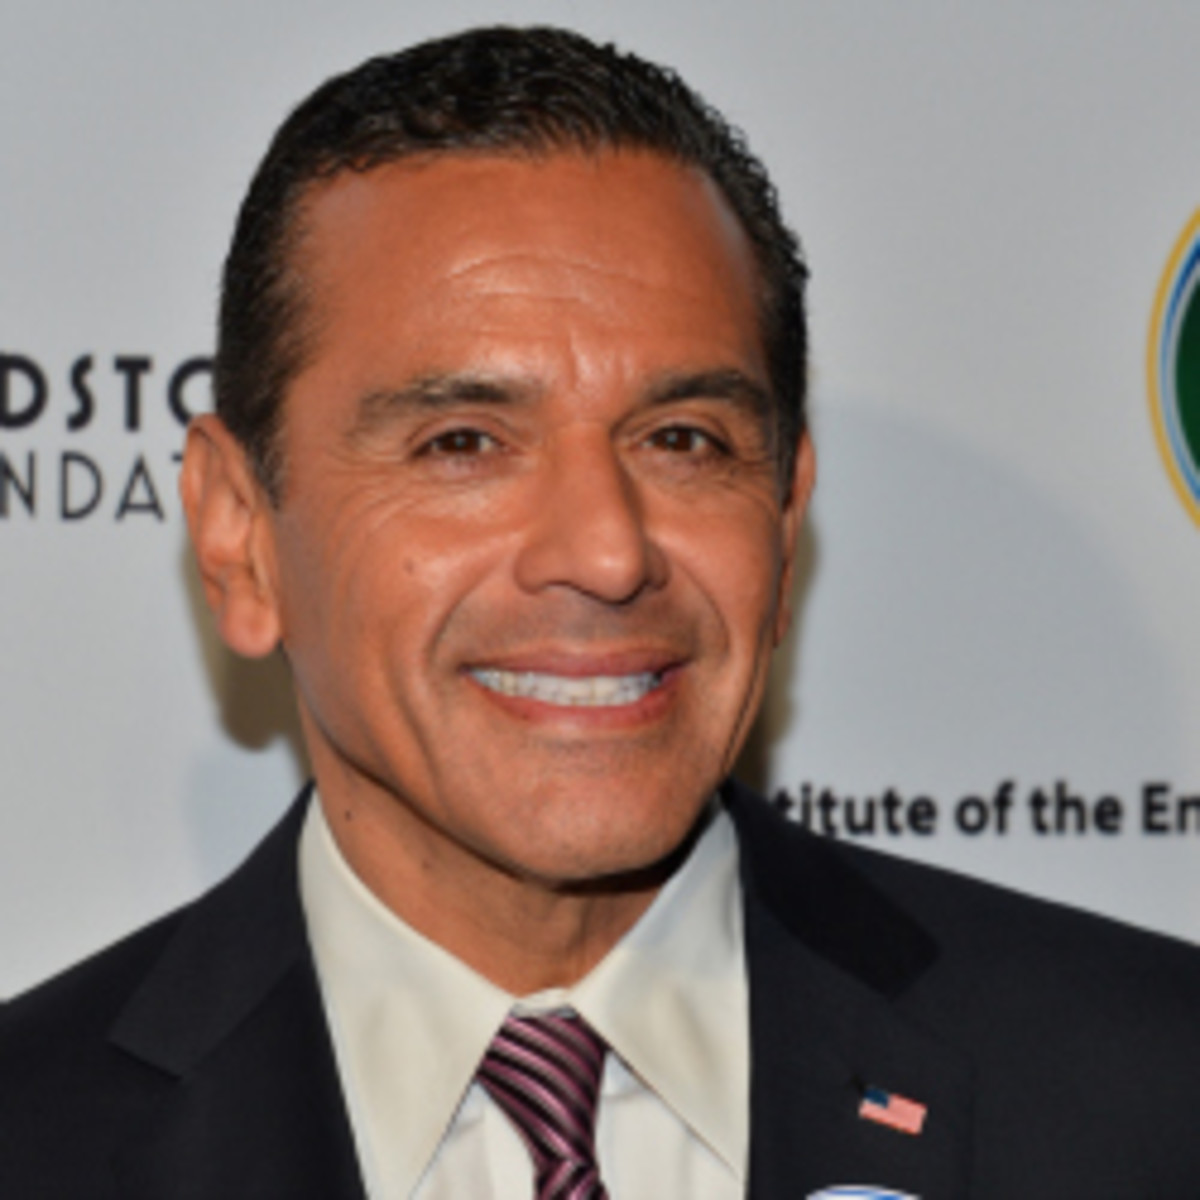 Los Angeles Mayor Antonio Villaraigosa wrote to the USOC stating the city's interest in hosting the 2024 Olympic Games. (Alberto E. Rodriguez/Getty Images)